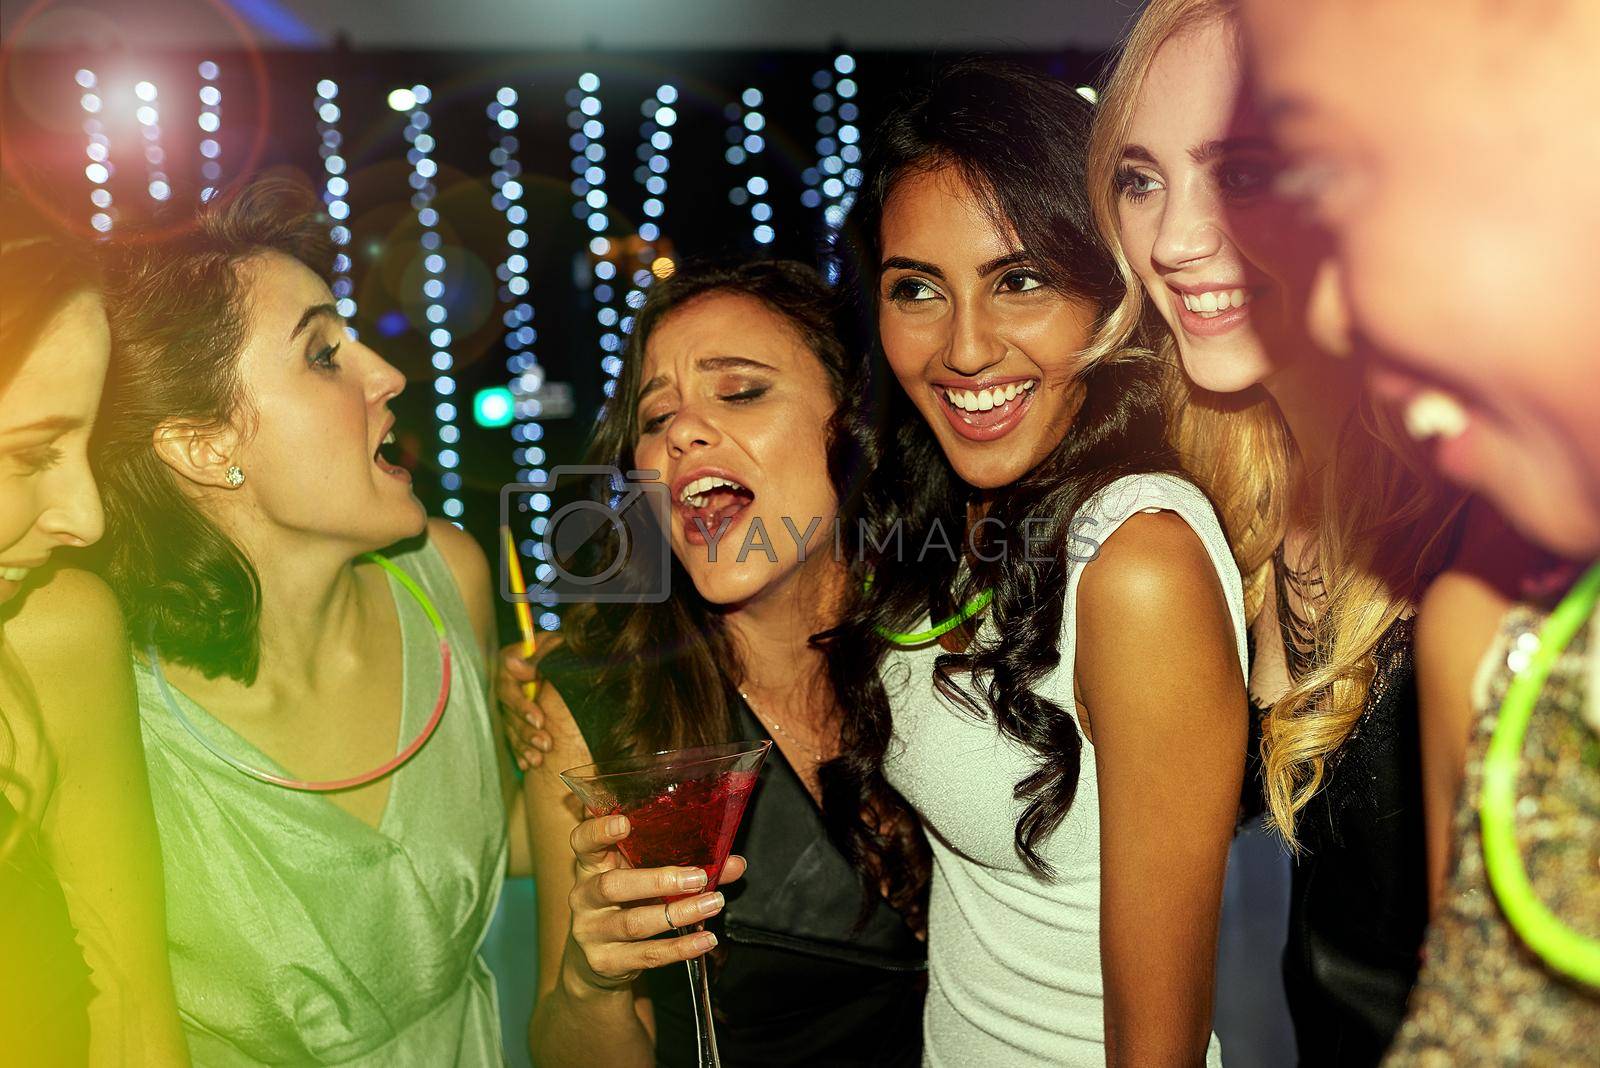 Shot of a group of young people enjoying themselves at a nightclub.